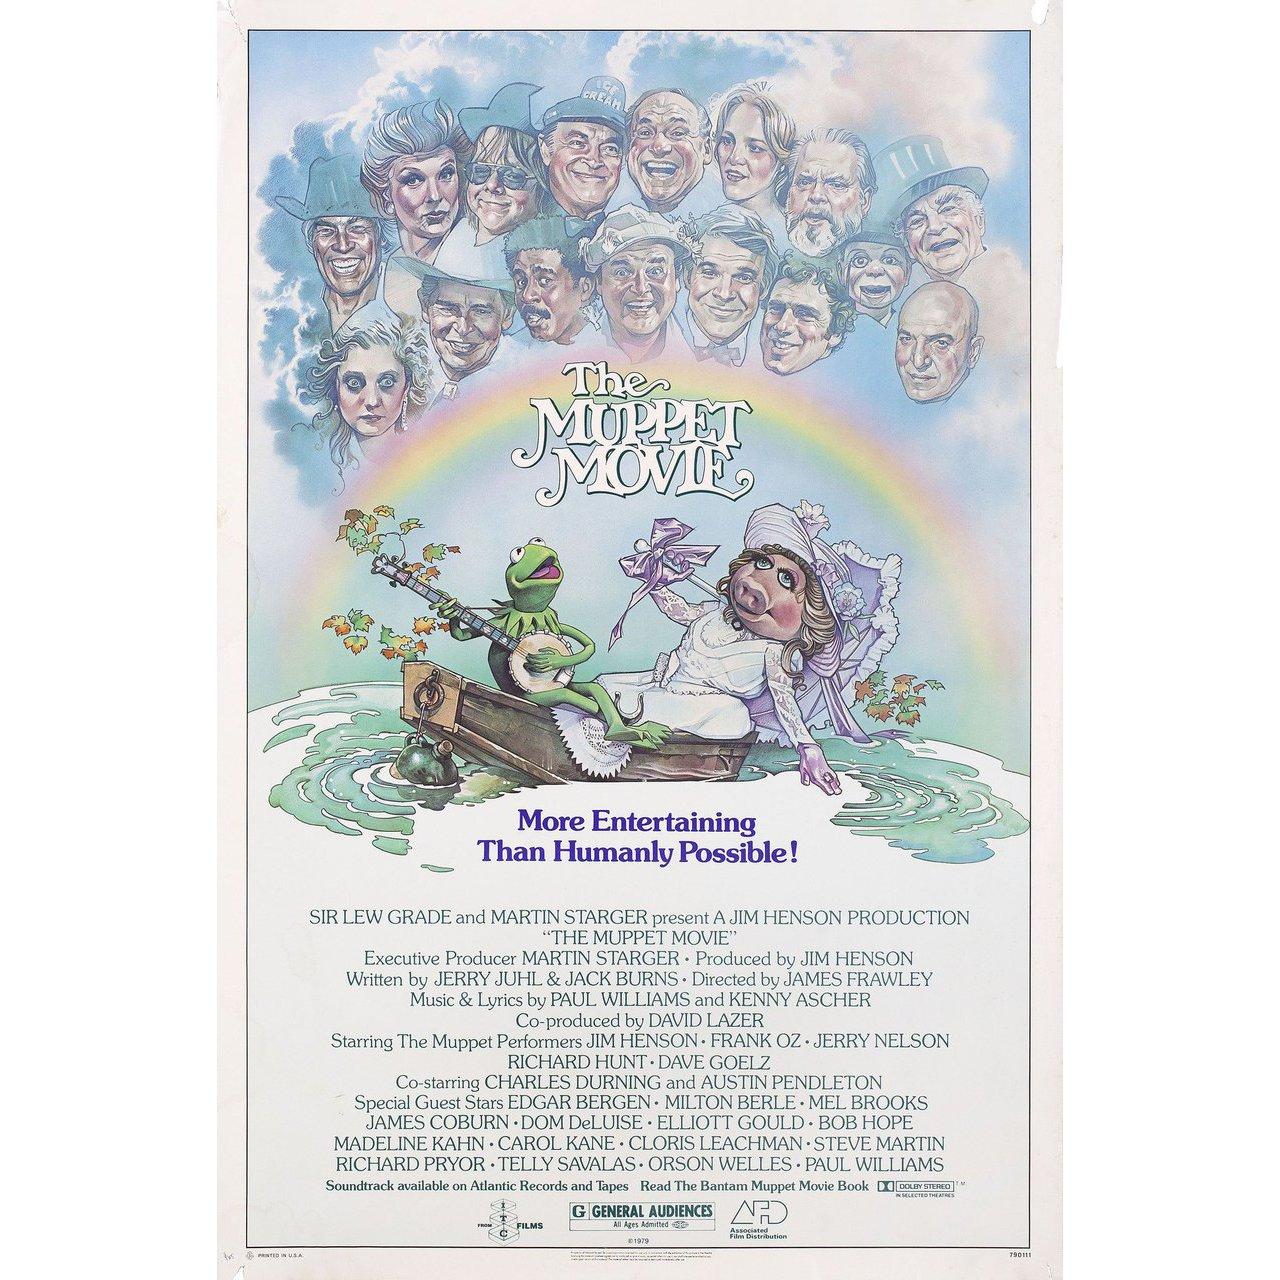 Original 1979 U.S. one sheet poster by Drew Struzan for the film “The Muppet Movie” directed by James Frawley with Jim Henson / Frank Oz / Jerry Nelson / Richard Hunt. Very good condition, rolled with water damage and paper loss at edges. Please